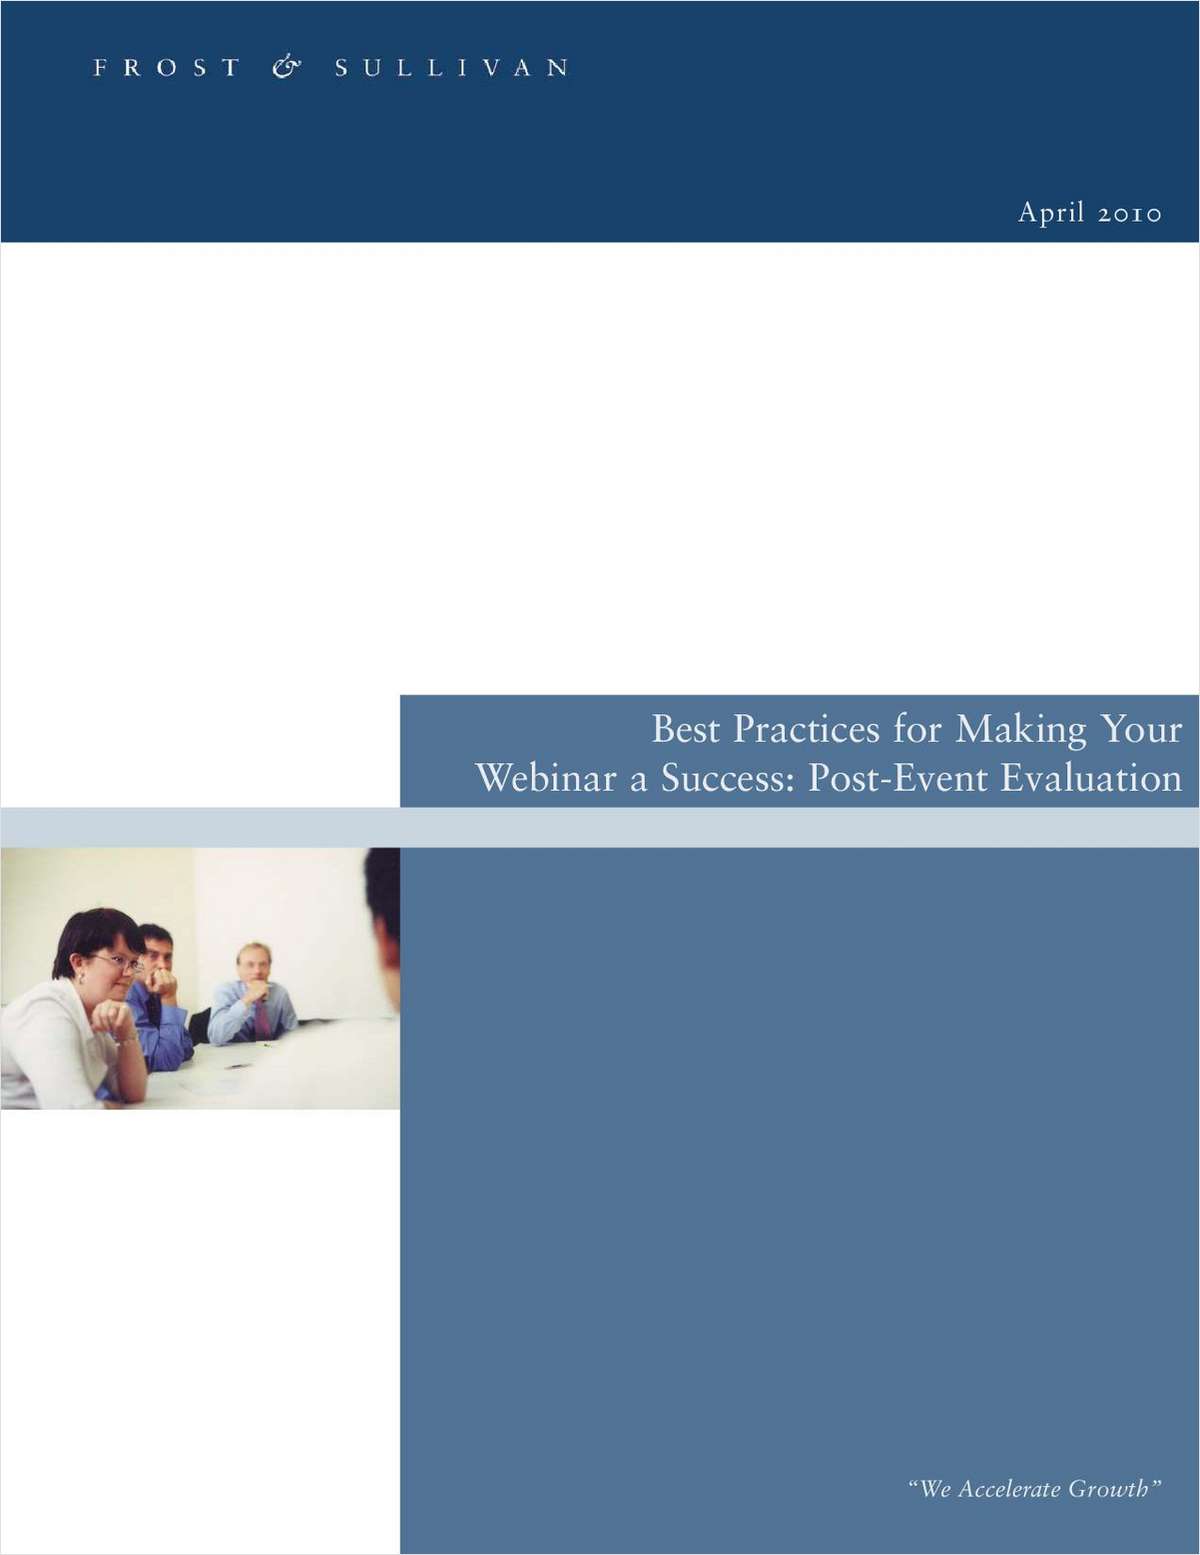 Best Practices for Making Your Webinar a Success -  Post-Event Evaluation